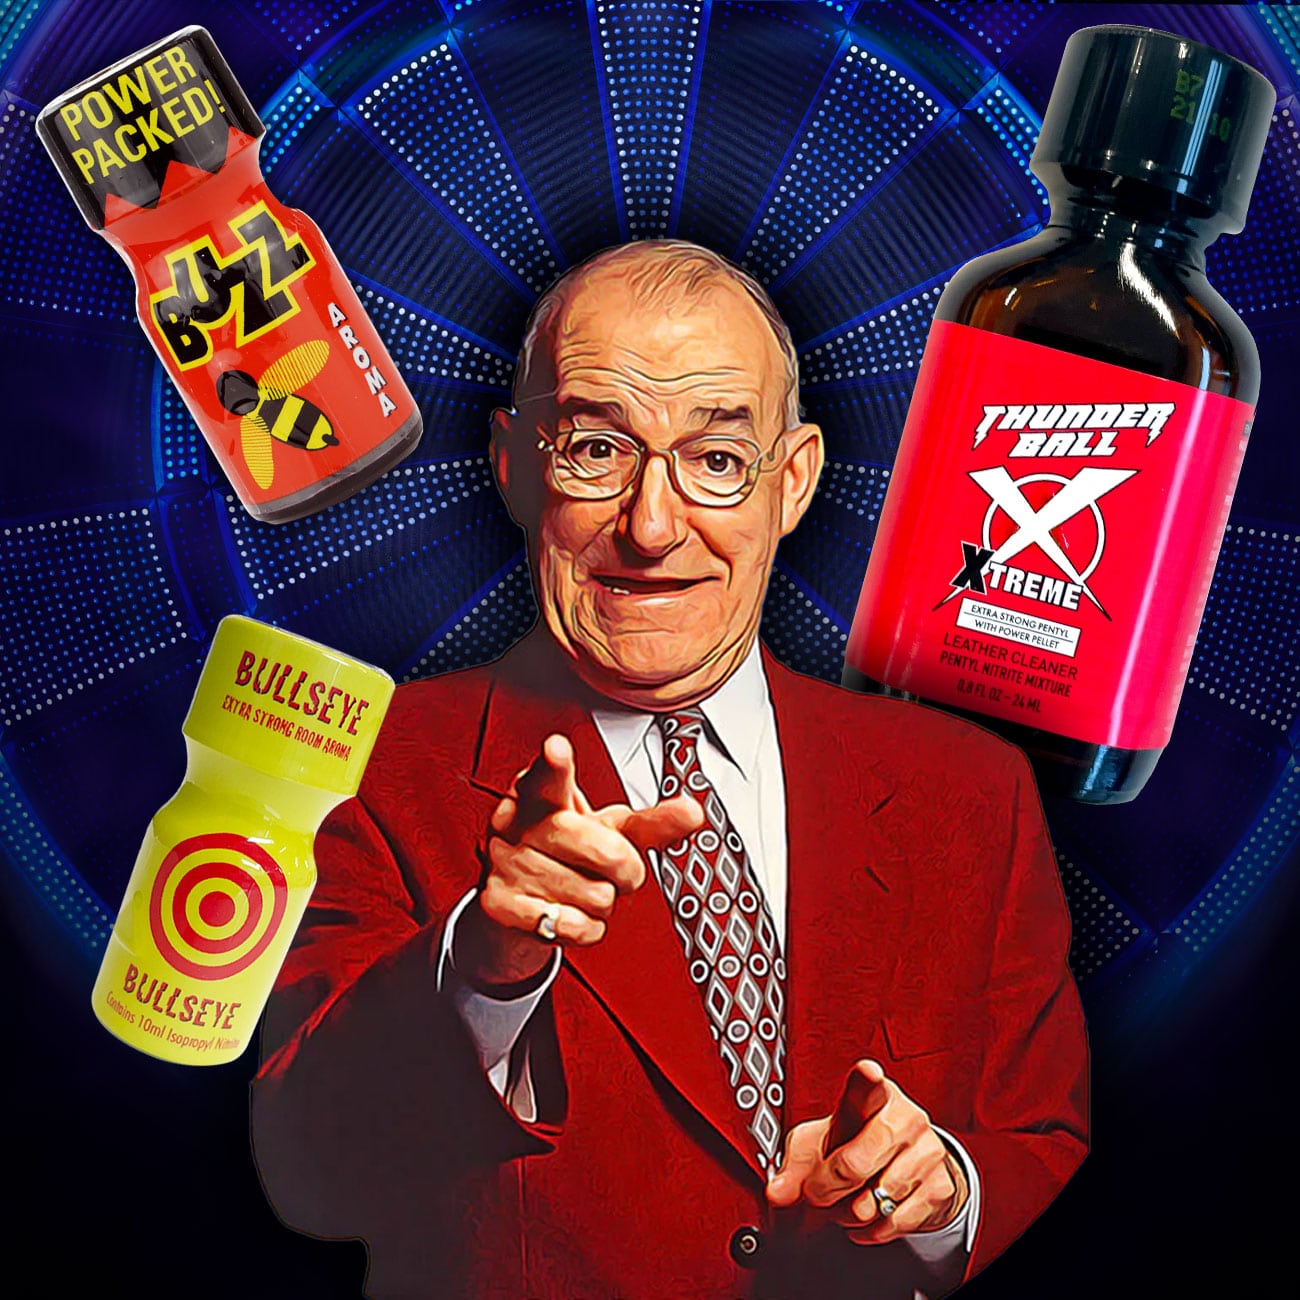 A whimsical illustration of a confident salesman in a red bowtie and glasses, pointing directly at the viewer, with an array of boldly labeled energy products called "thunder buzz" and "The Bullseye Pack".